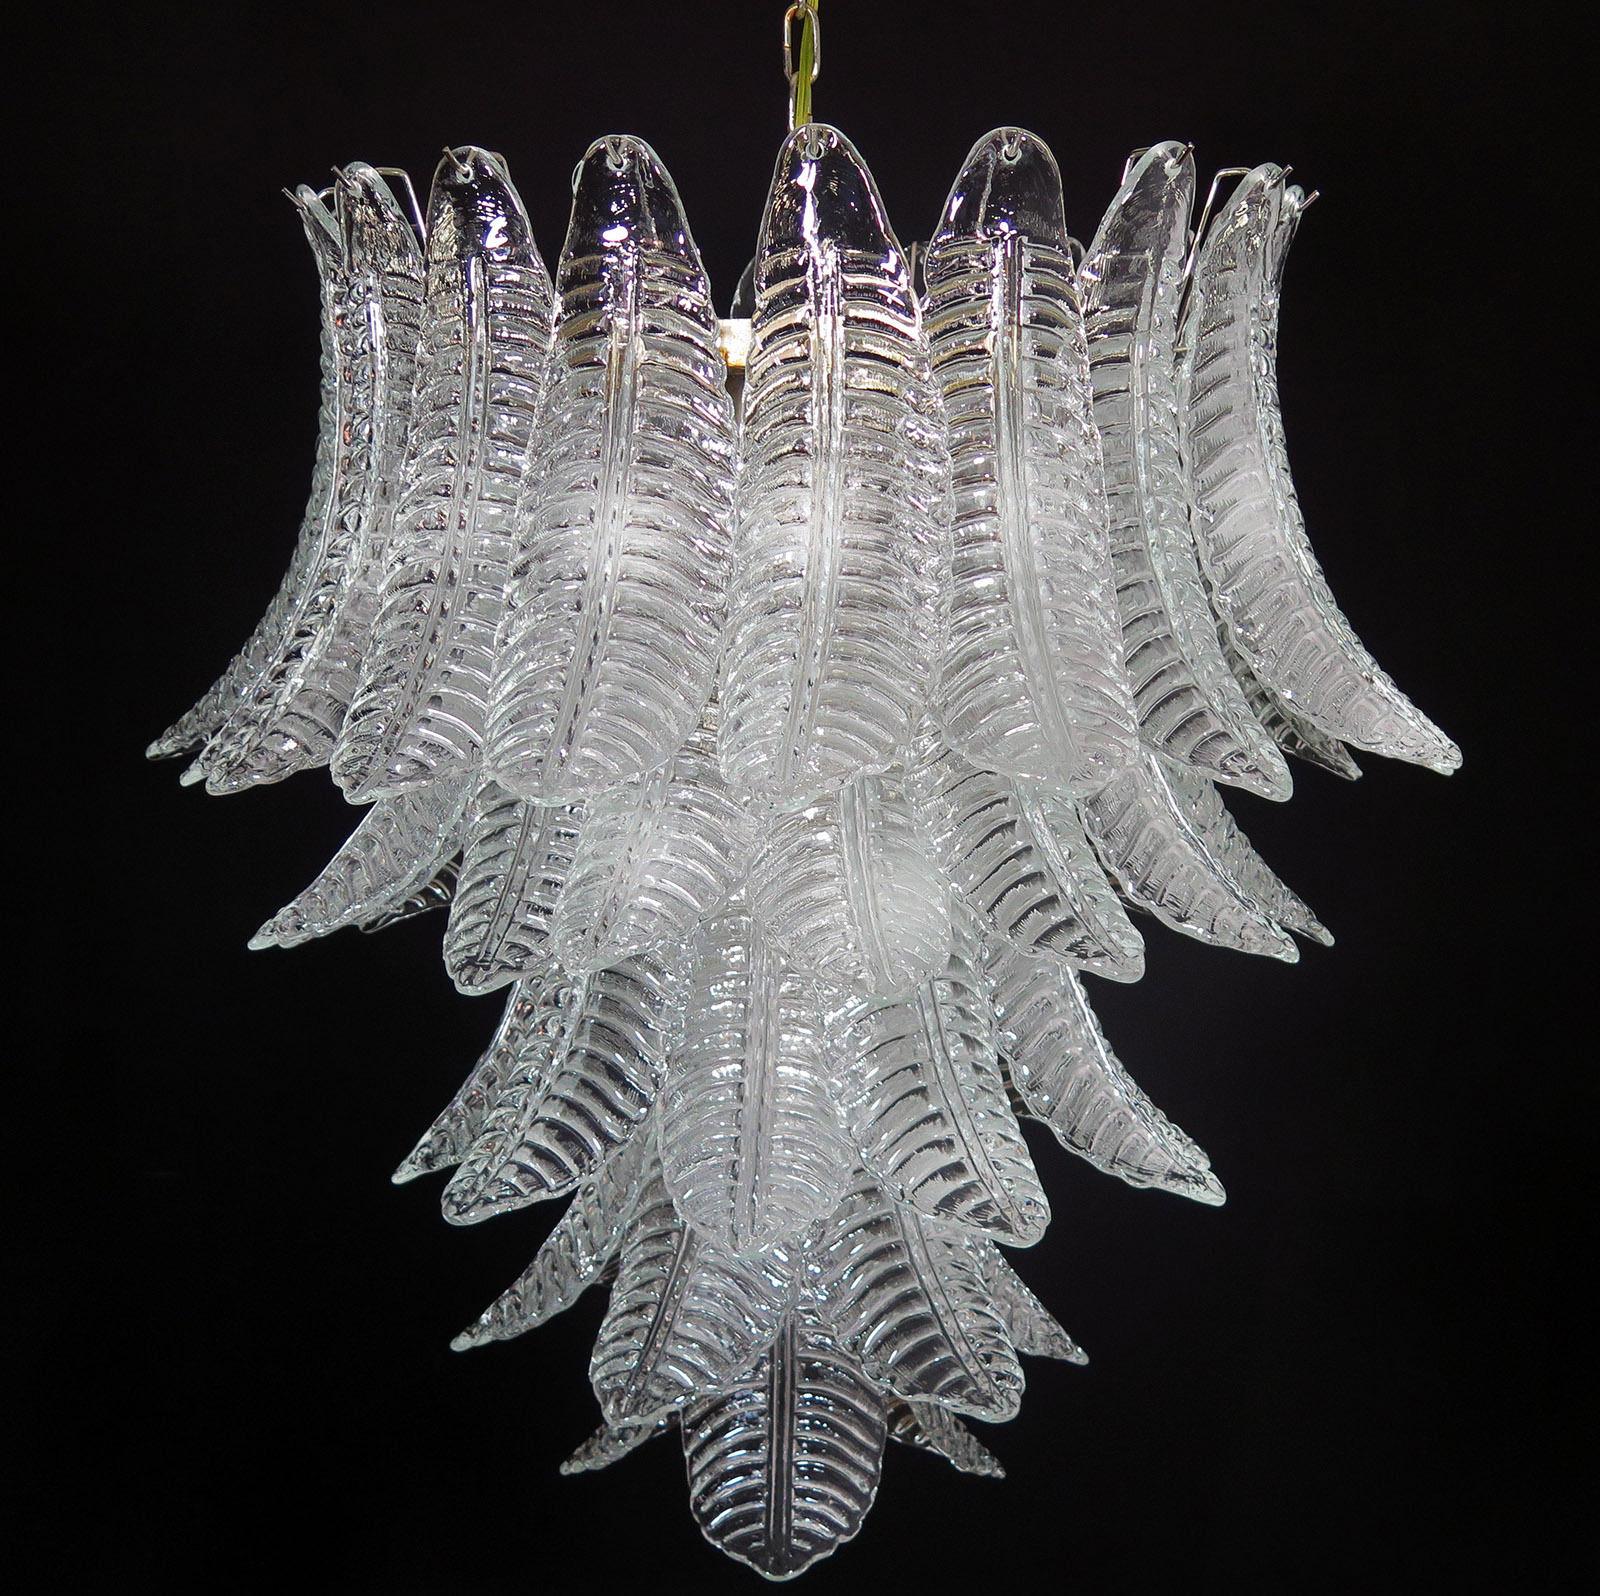 Pair of Italian Leaves Chandeliers, Barovier and Toso Style, Murano For Sale 5